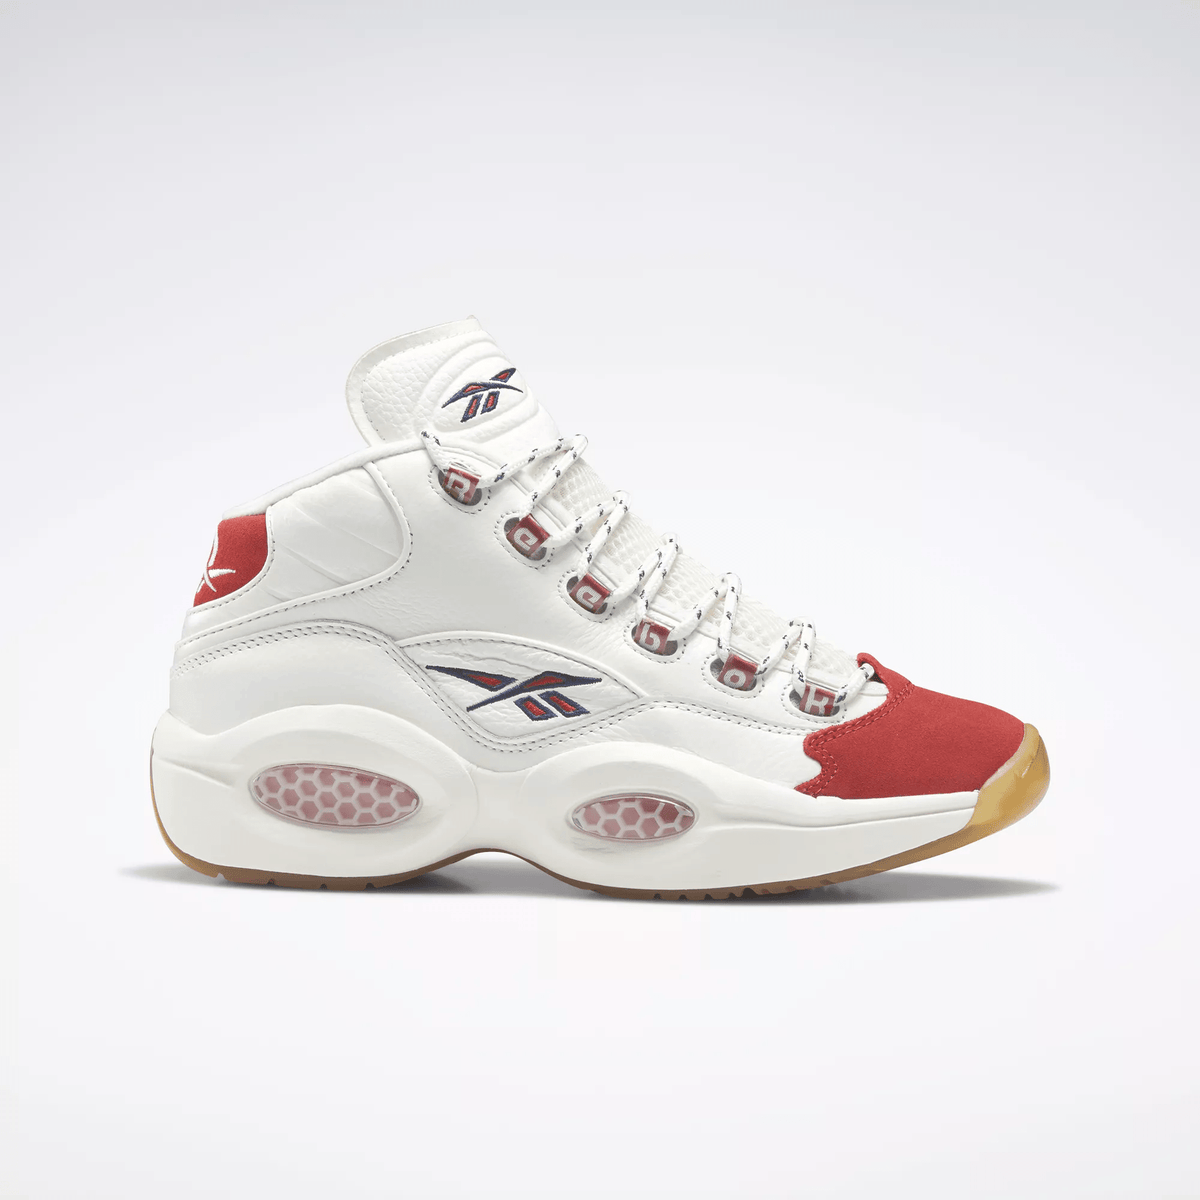 Reebok Men's Question Mid Basketball Shoes Red